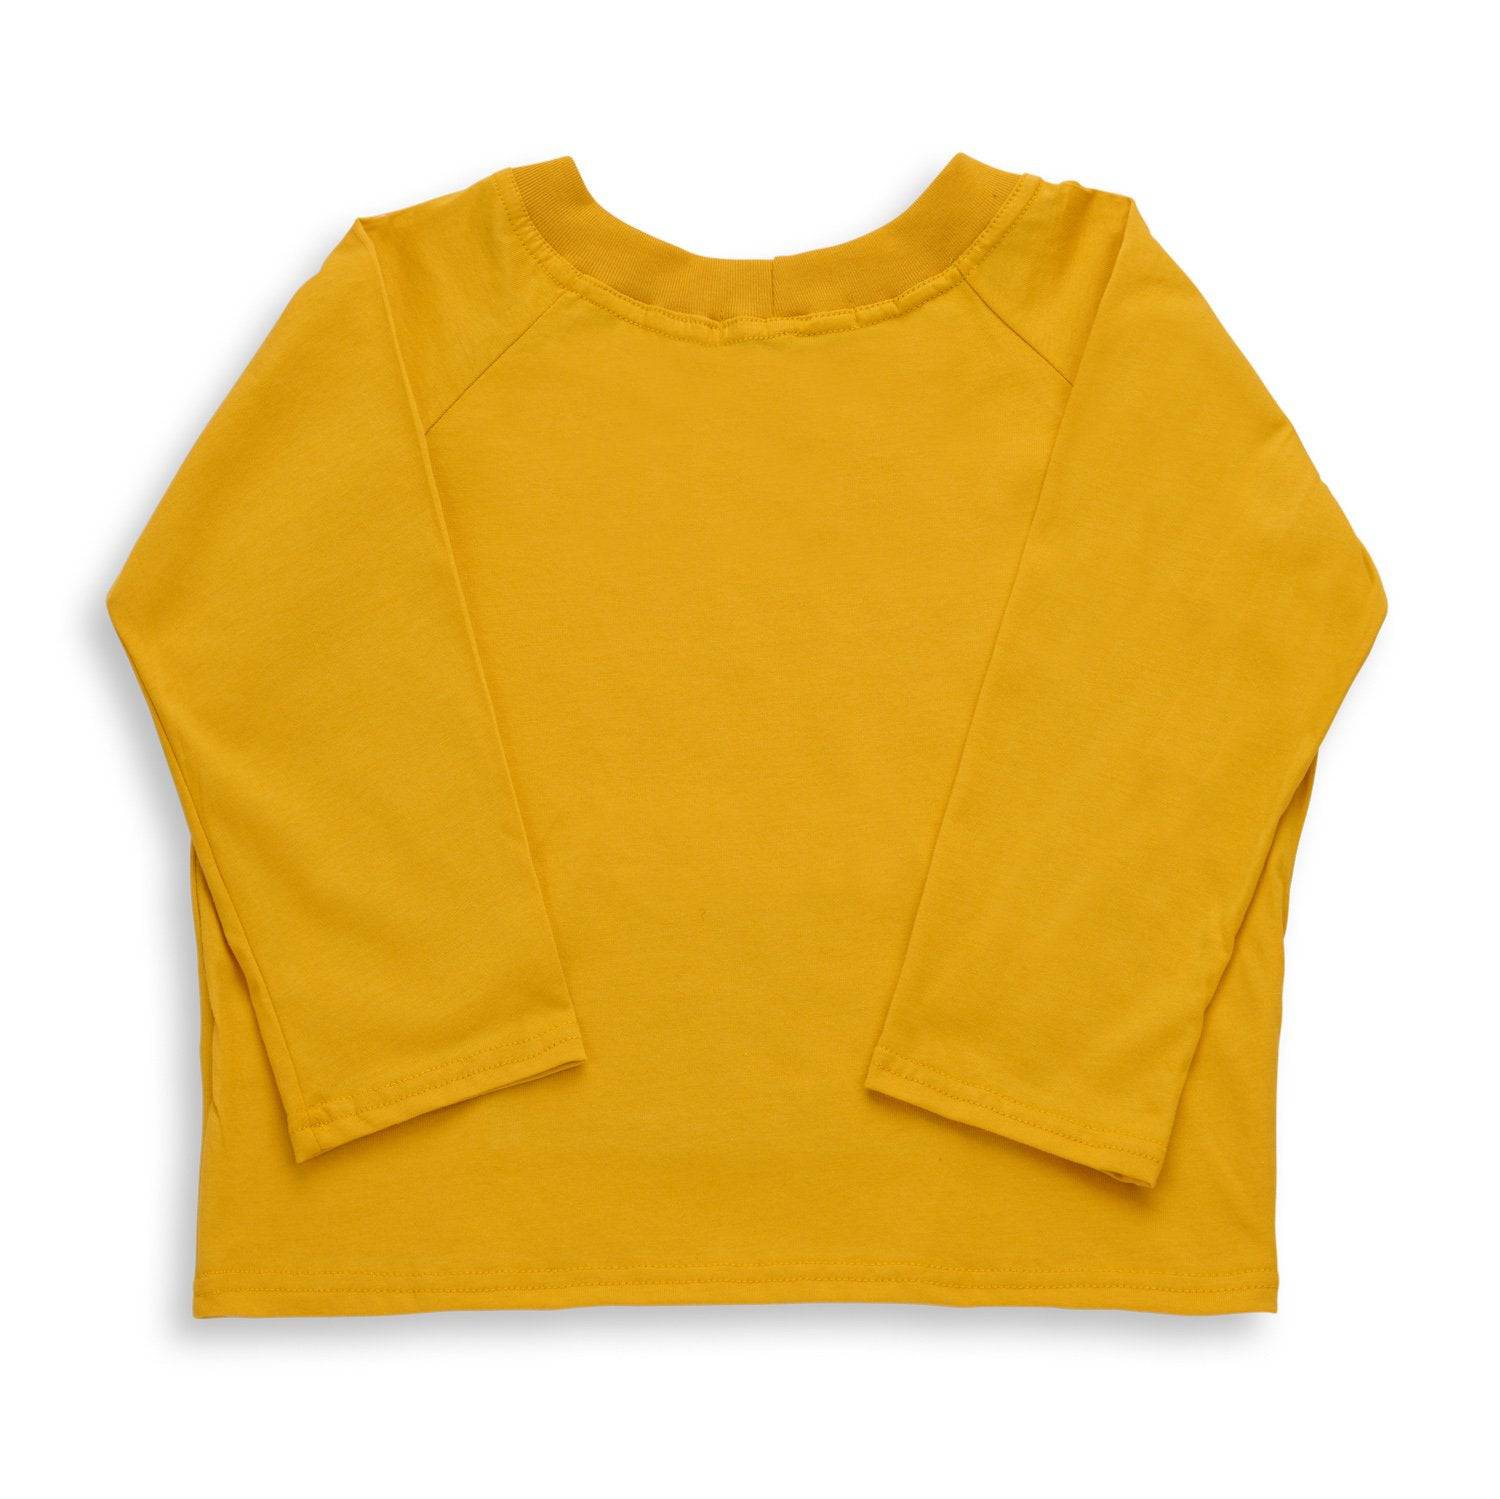 The Boat T-Shirts (boys - yellow) - CooCootales